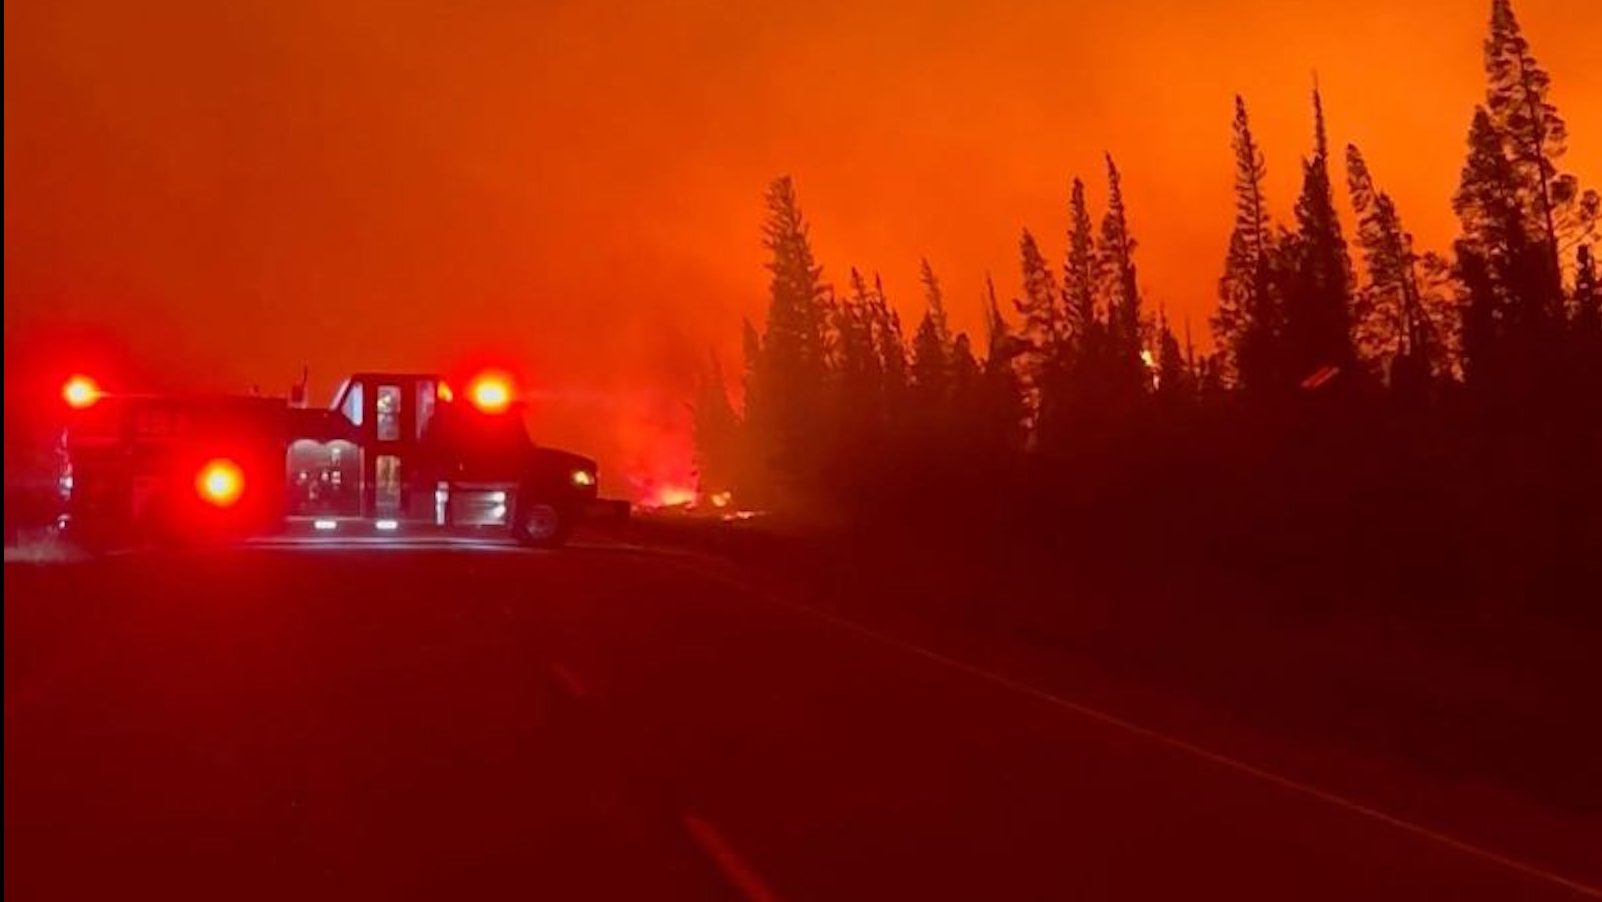 Hundreds of wildfires in Canada’s Northwest Territories prompt evacuations in what officials call a ‘crisis situation’